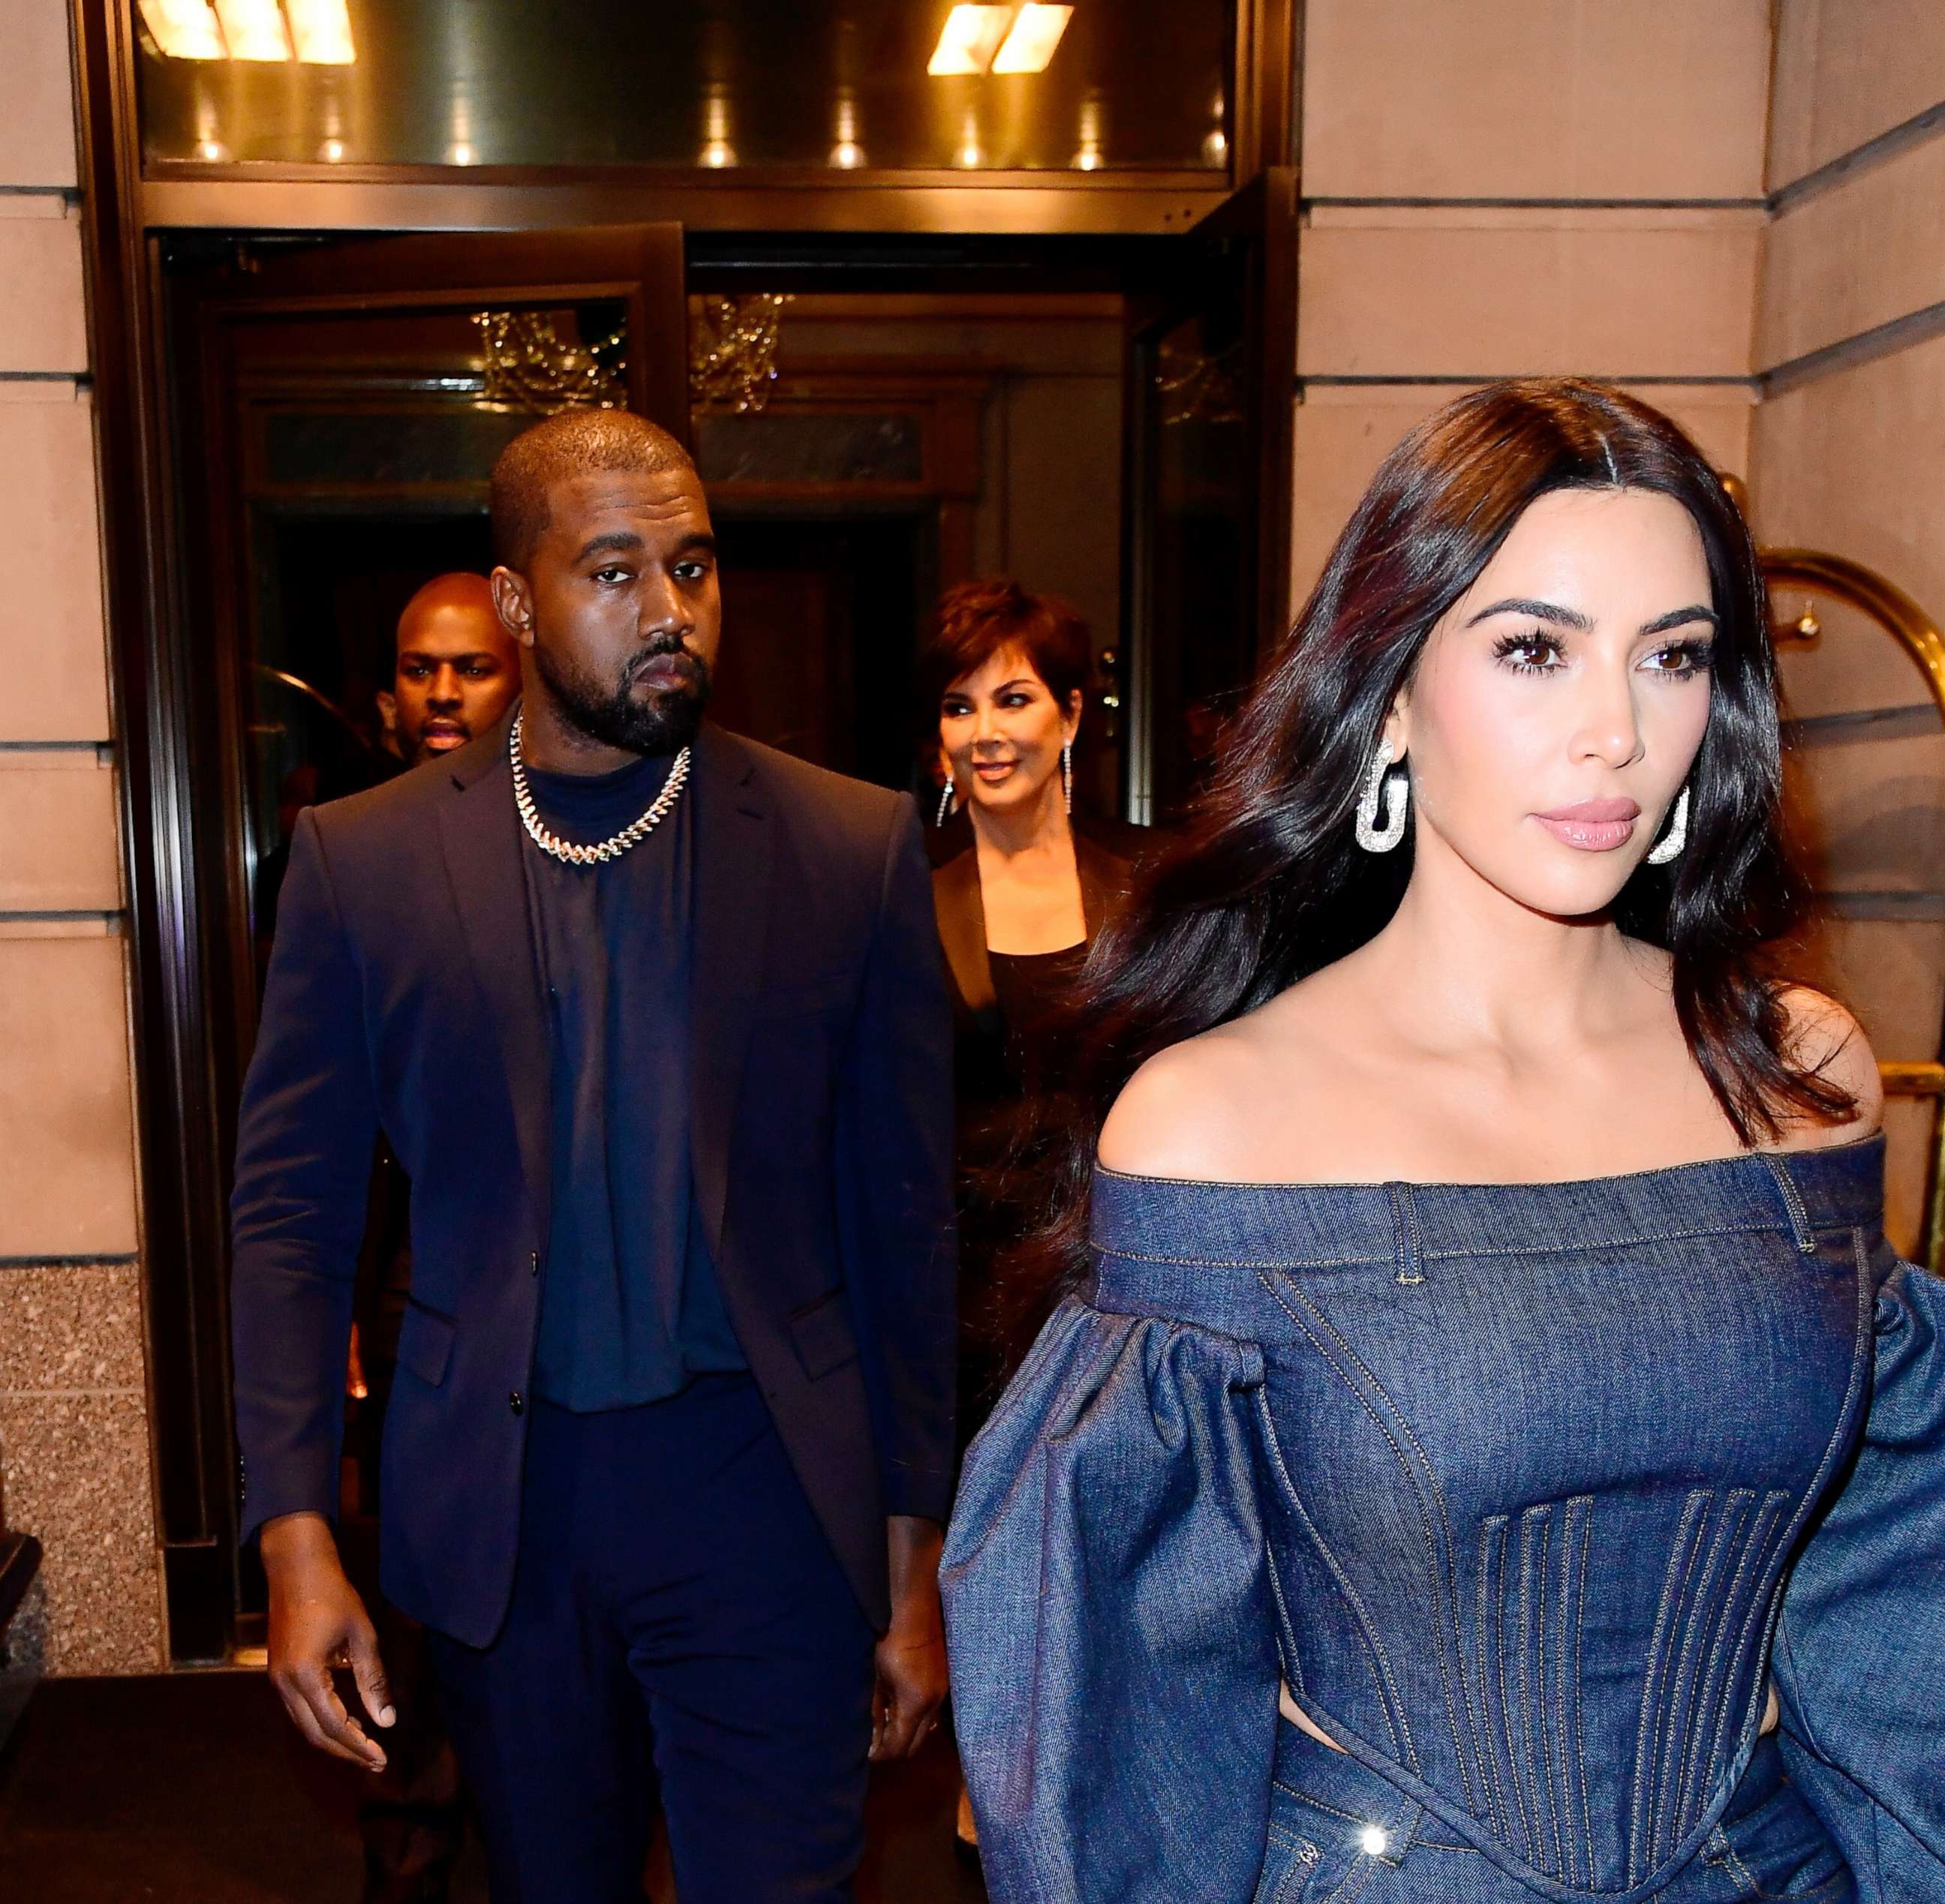 PHOTO: Kim Kardashian-West and Kanye West exit a hotel accompanied by Kris Jenner in the Manhattan area of New York on Nov 6, 2019.